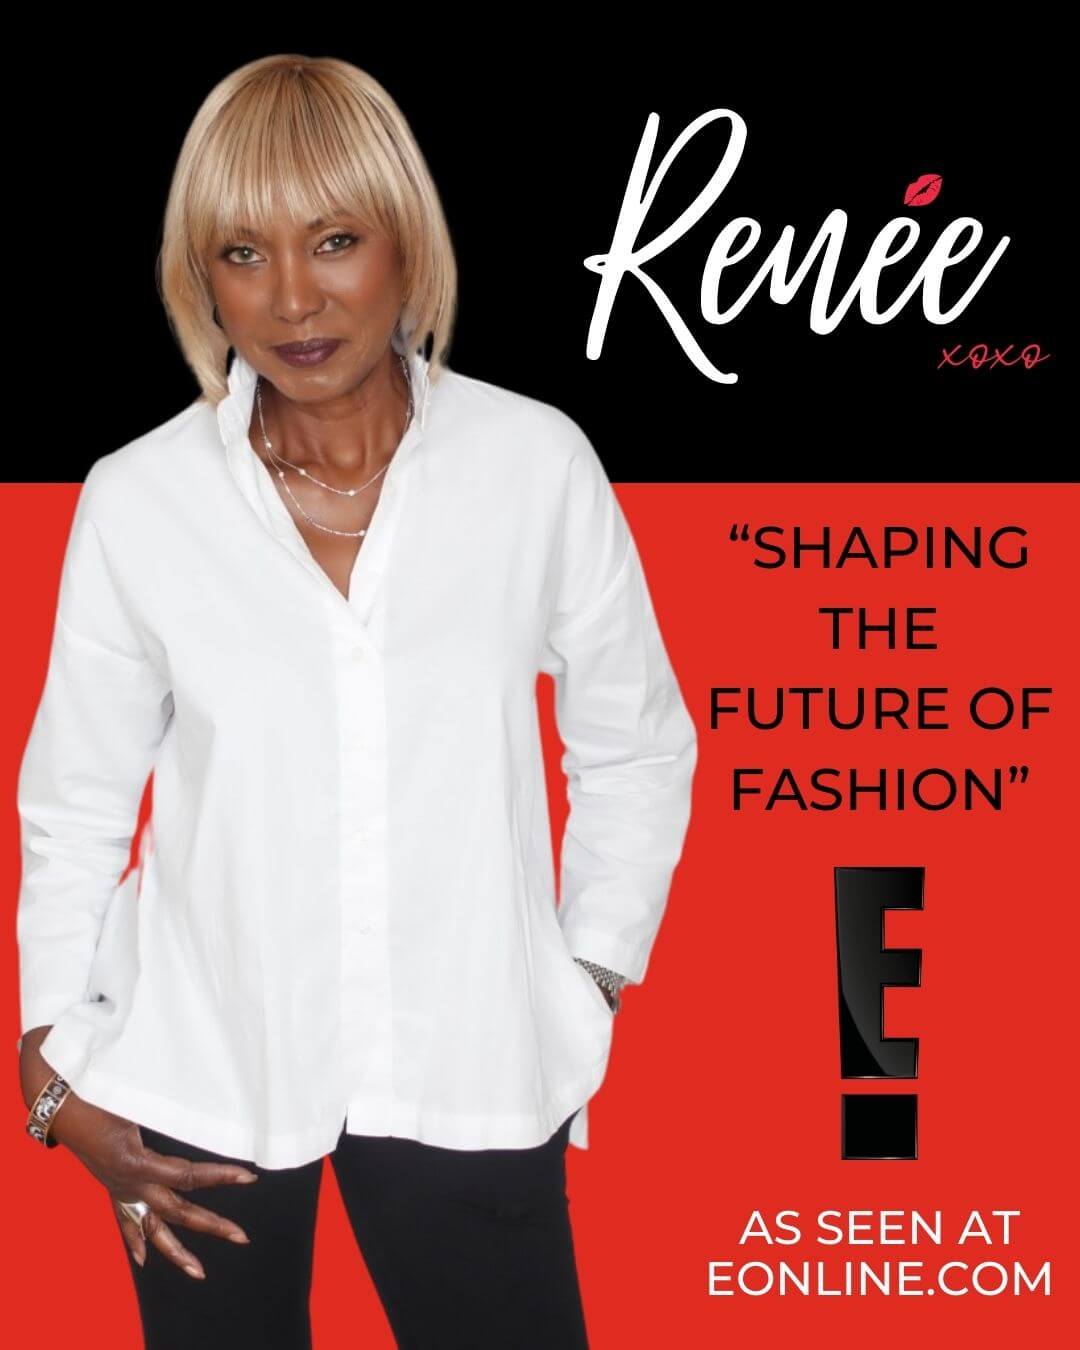 Renée Greenstein featured by E! - Shaping the Future of Fashion